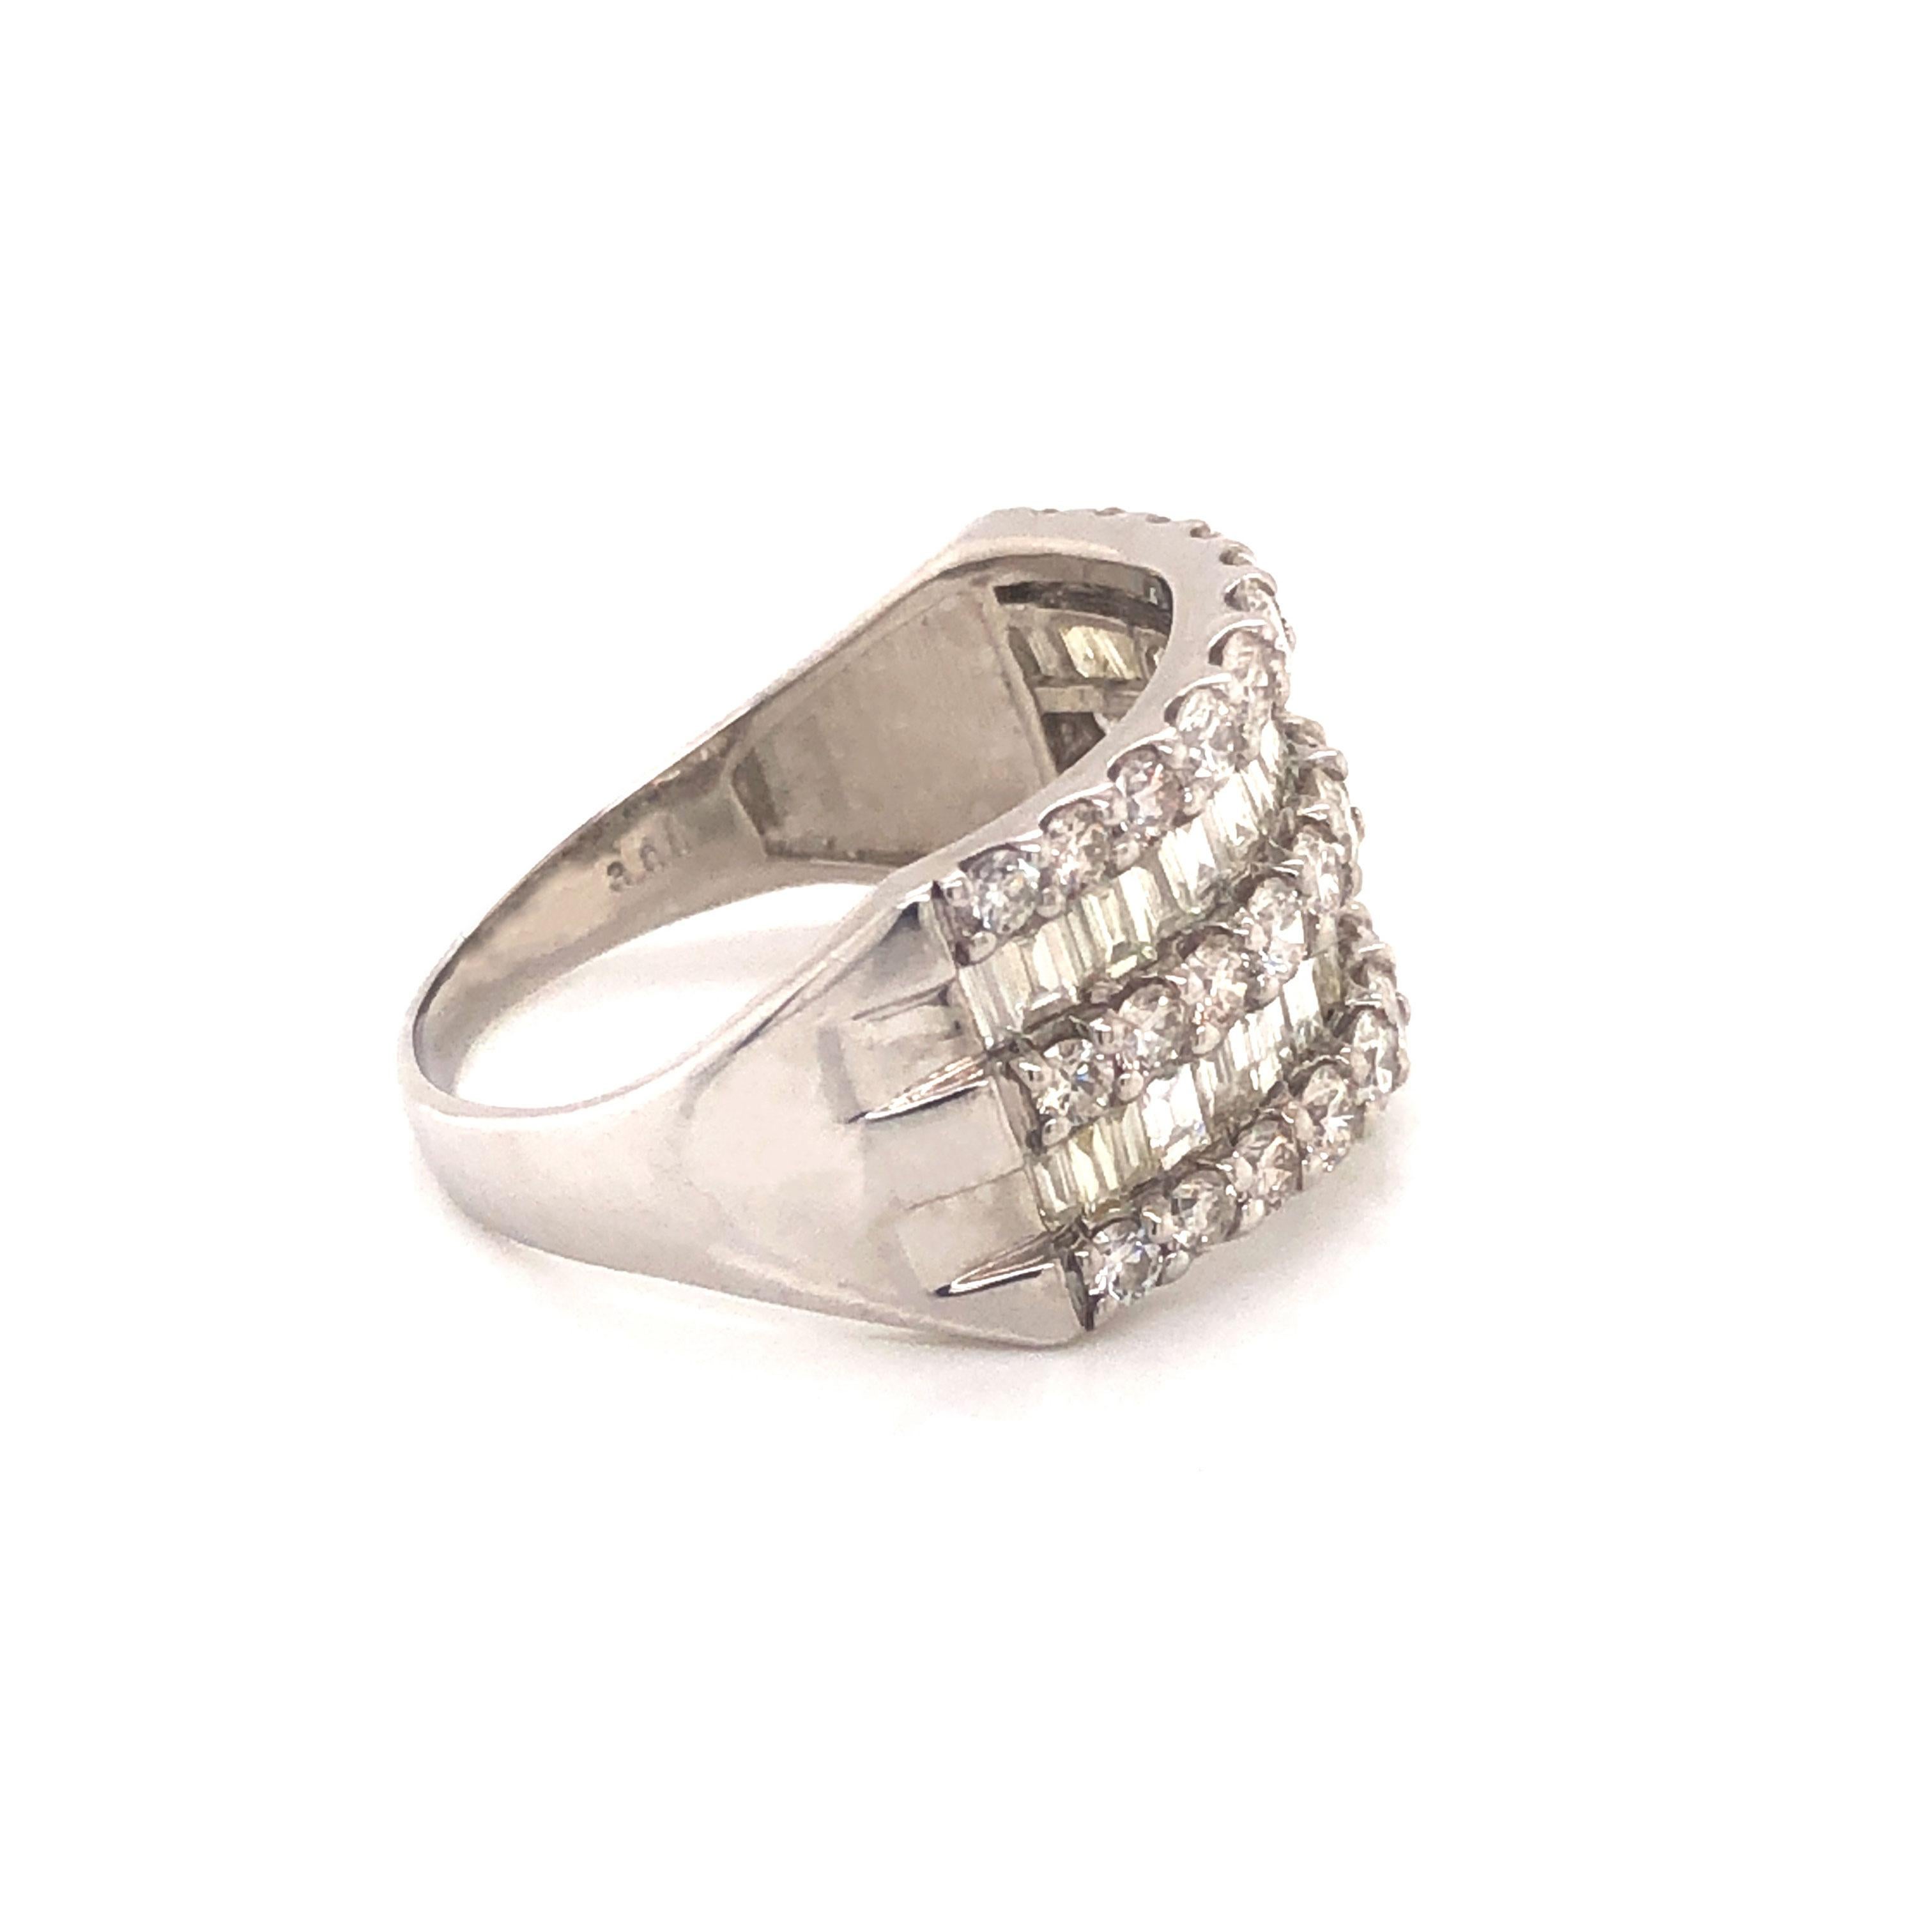 5 Row Wide Diamond Band in Platinum In Good Condition For Sale In Honolulu, HI